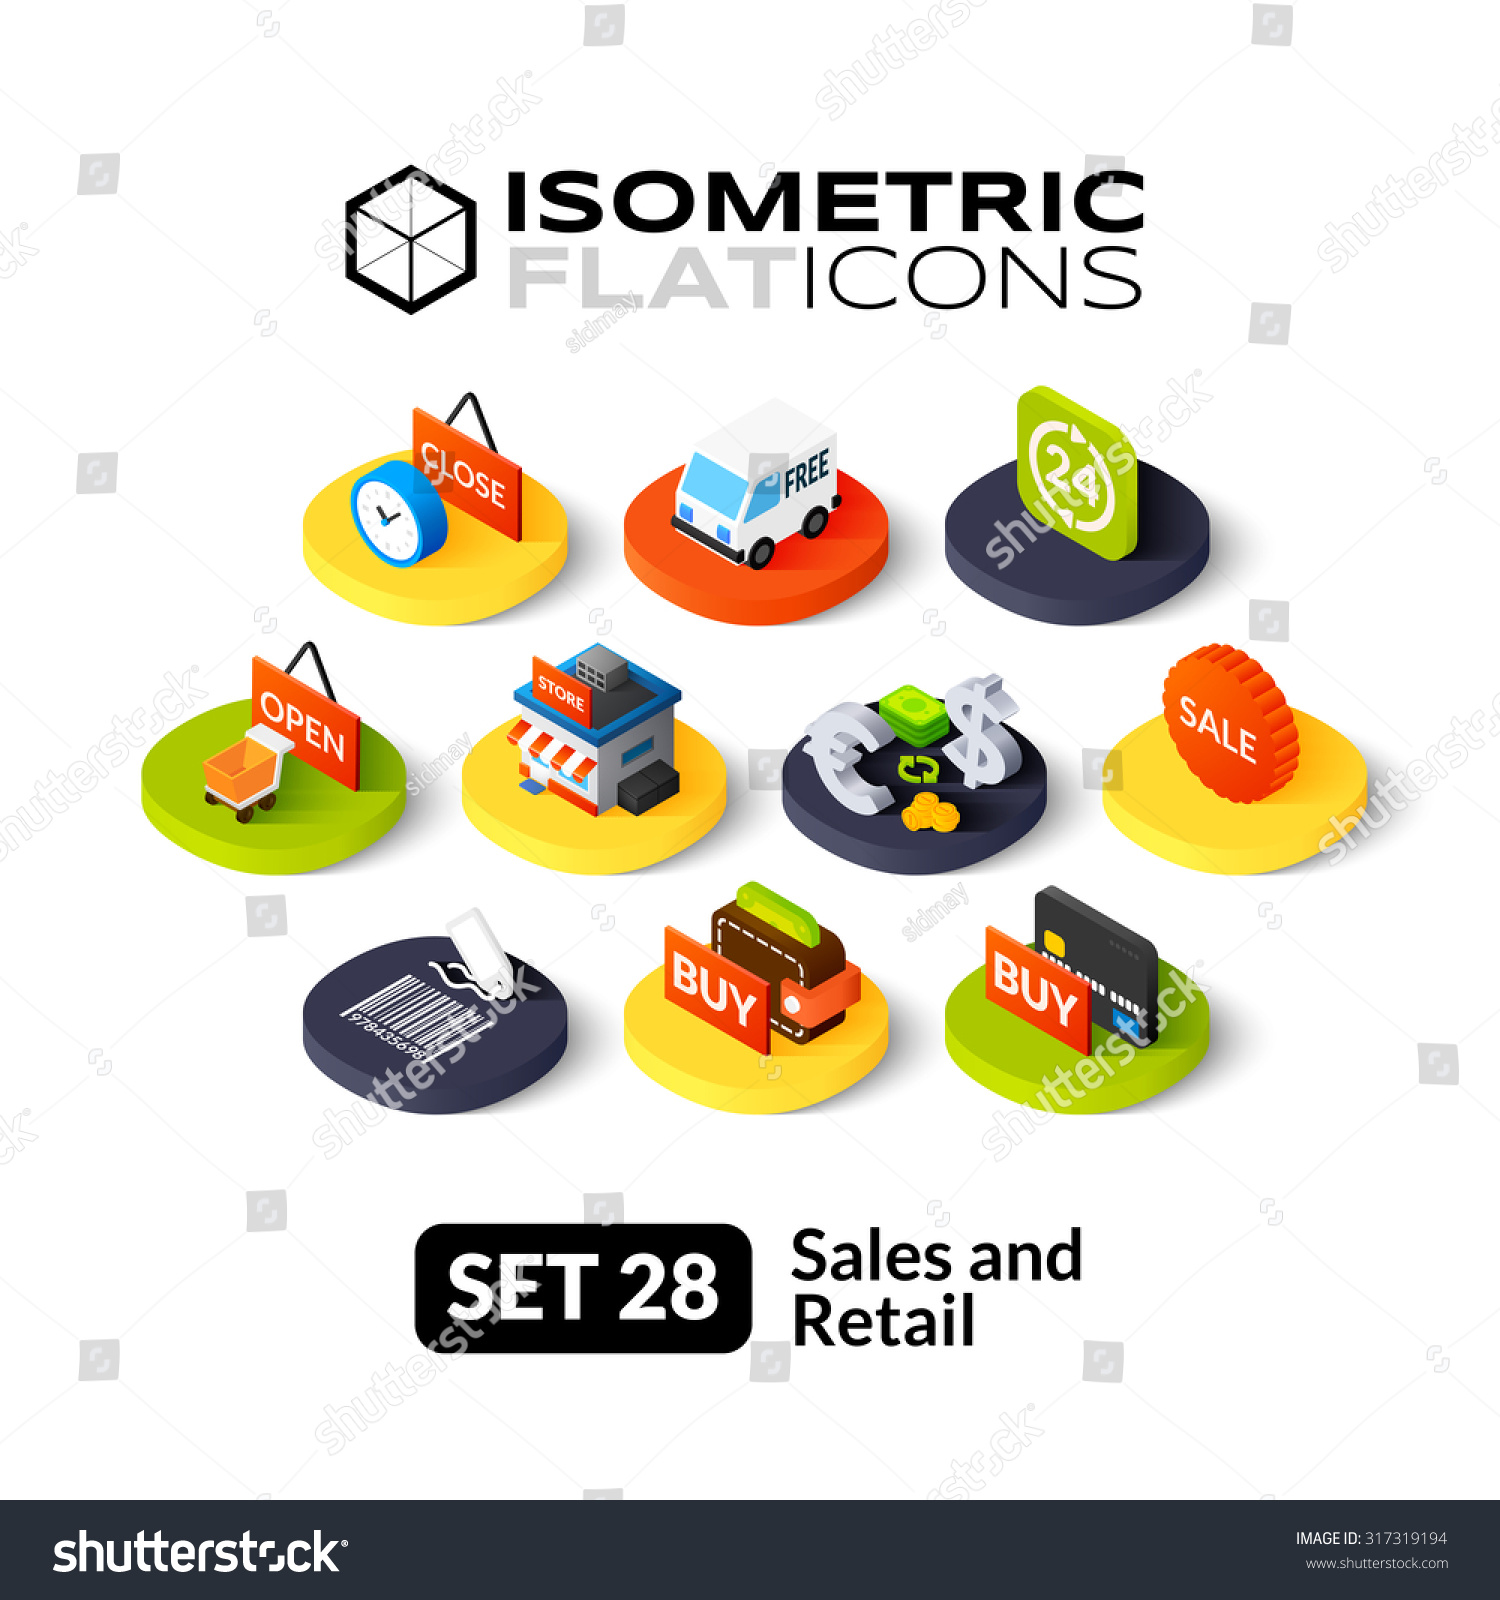 stock-vector-isometric-flat-icons-d-pictograms-vector-set-sales-and-retail-symbol-collection-317319194